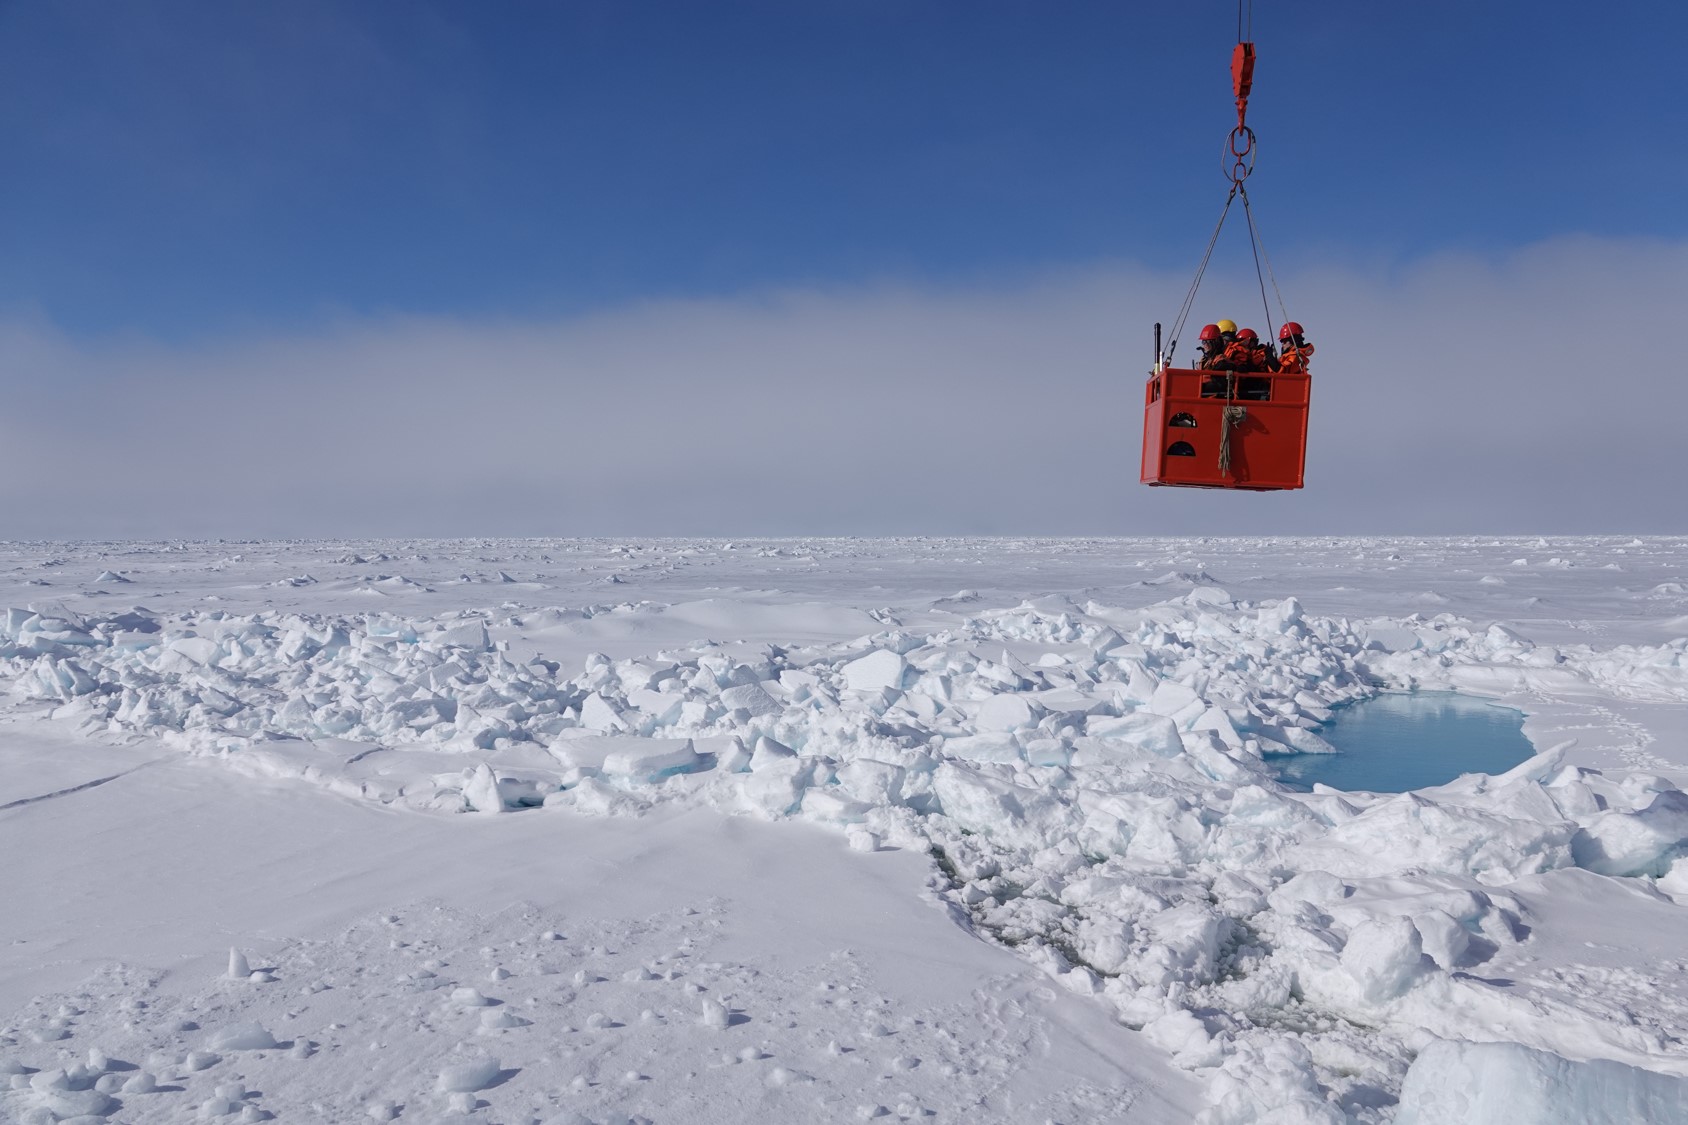 A group of scientists get hoisted back their ship after taking measurements on Arctic sea ice